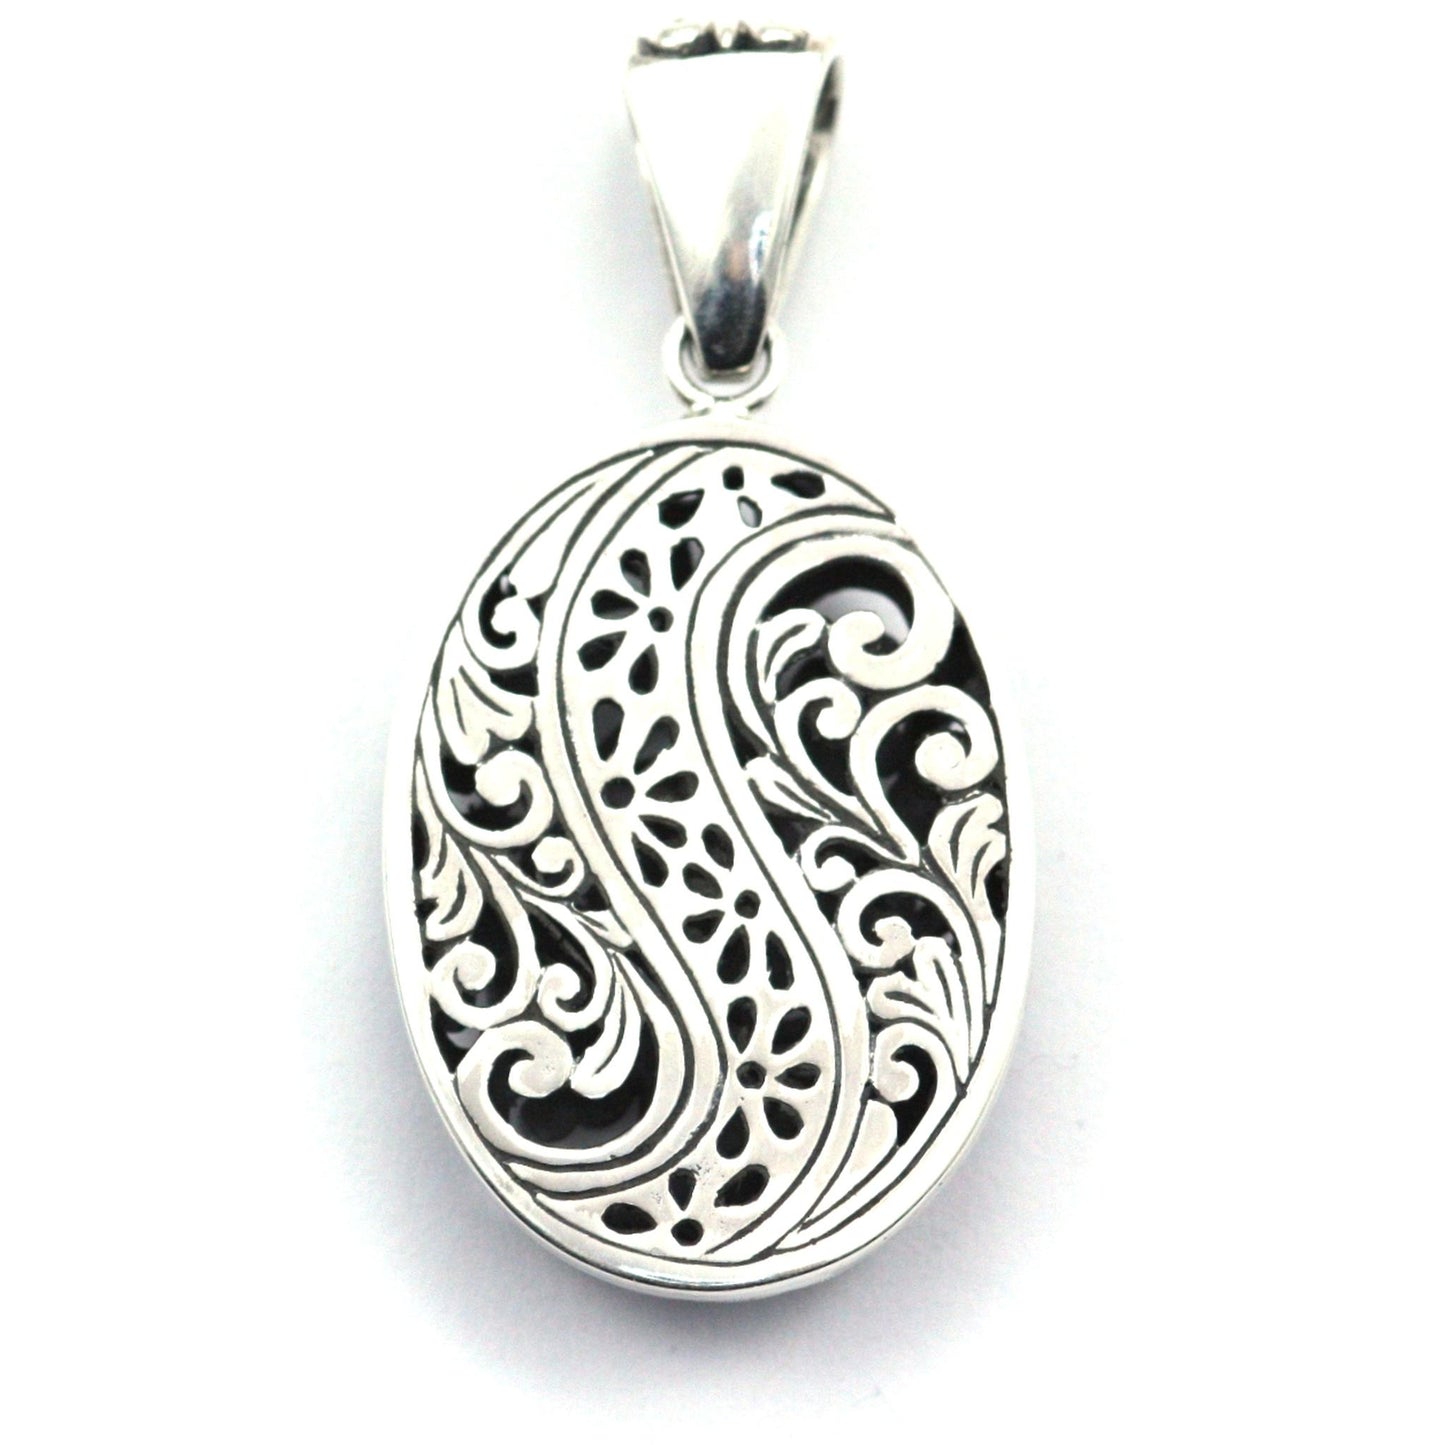 P501 LIMITED .925 Sterling Silver Ornate Filigree Oval Pendant